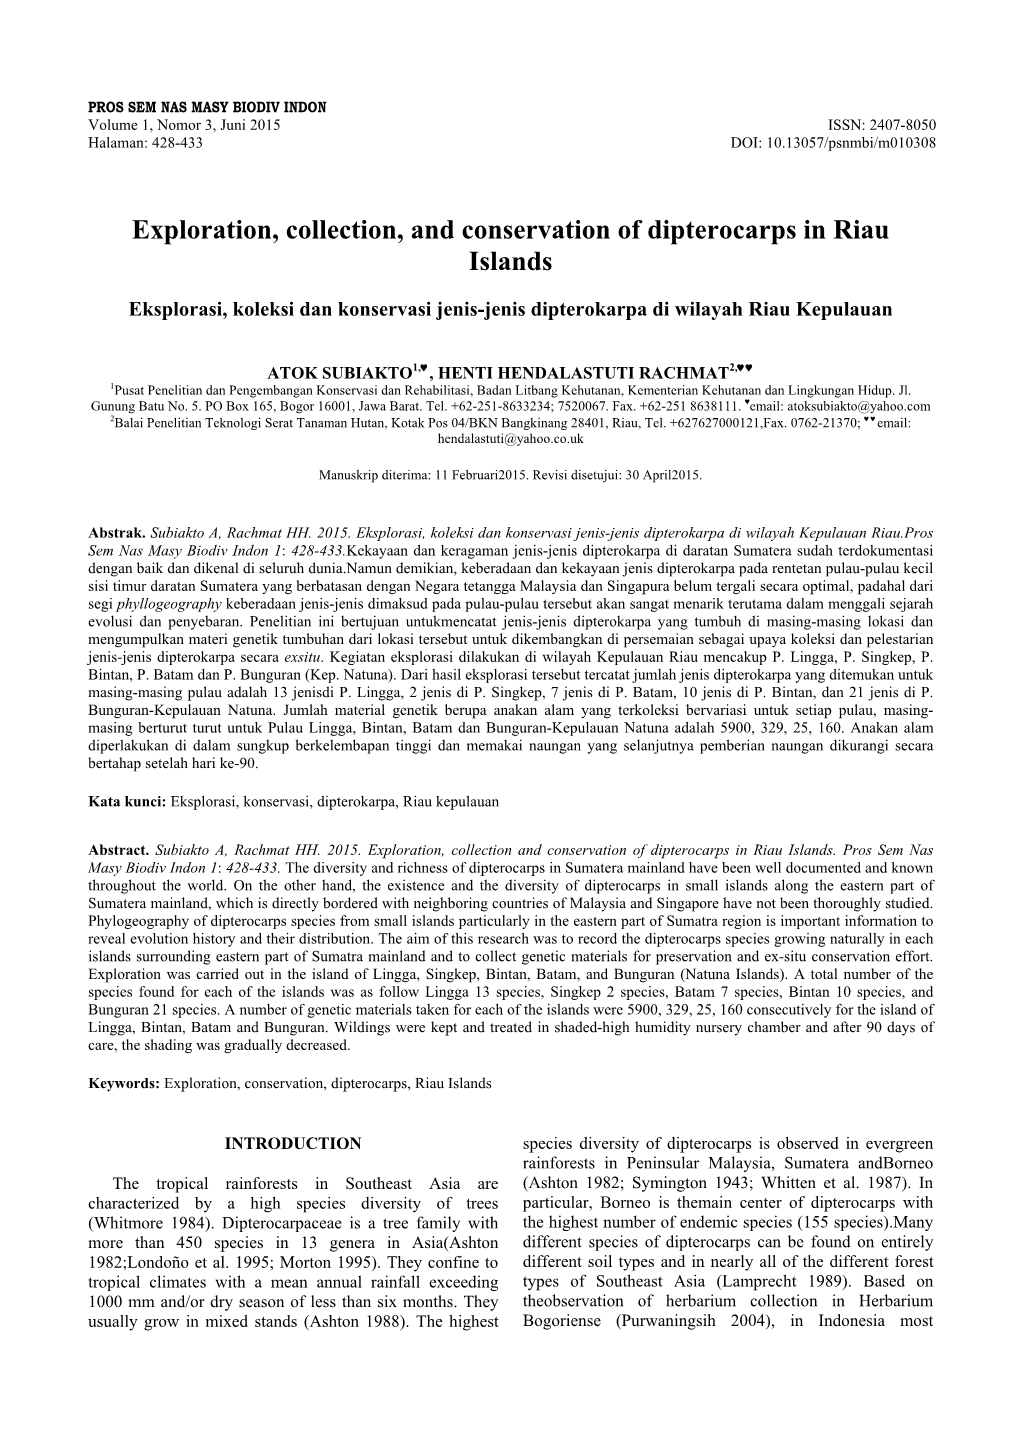 Exploration, Collection, and Conservation of Dipterocarps in Riau Islands